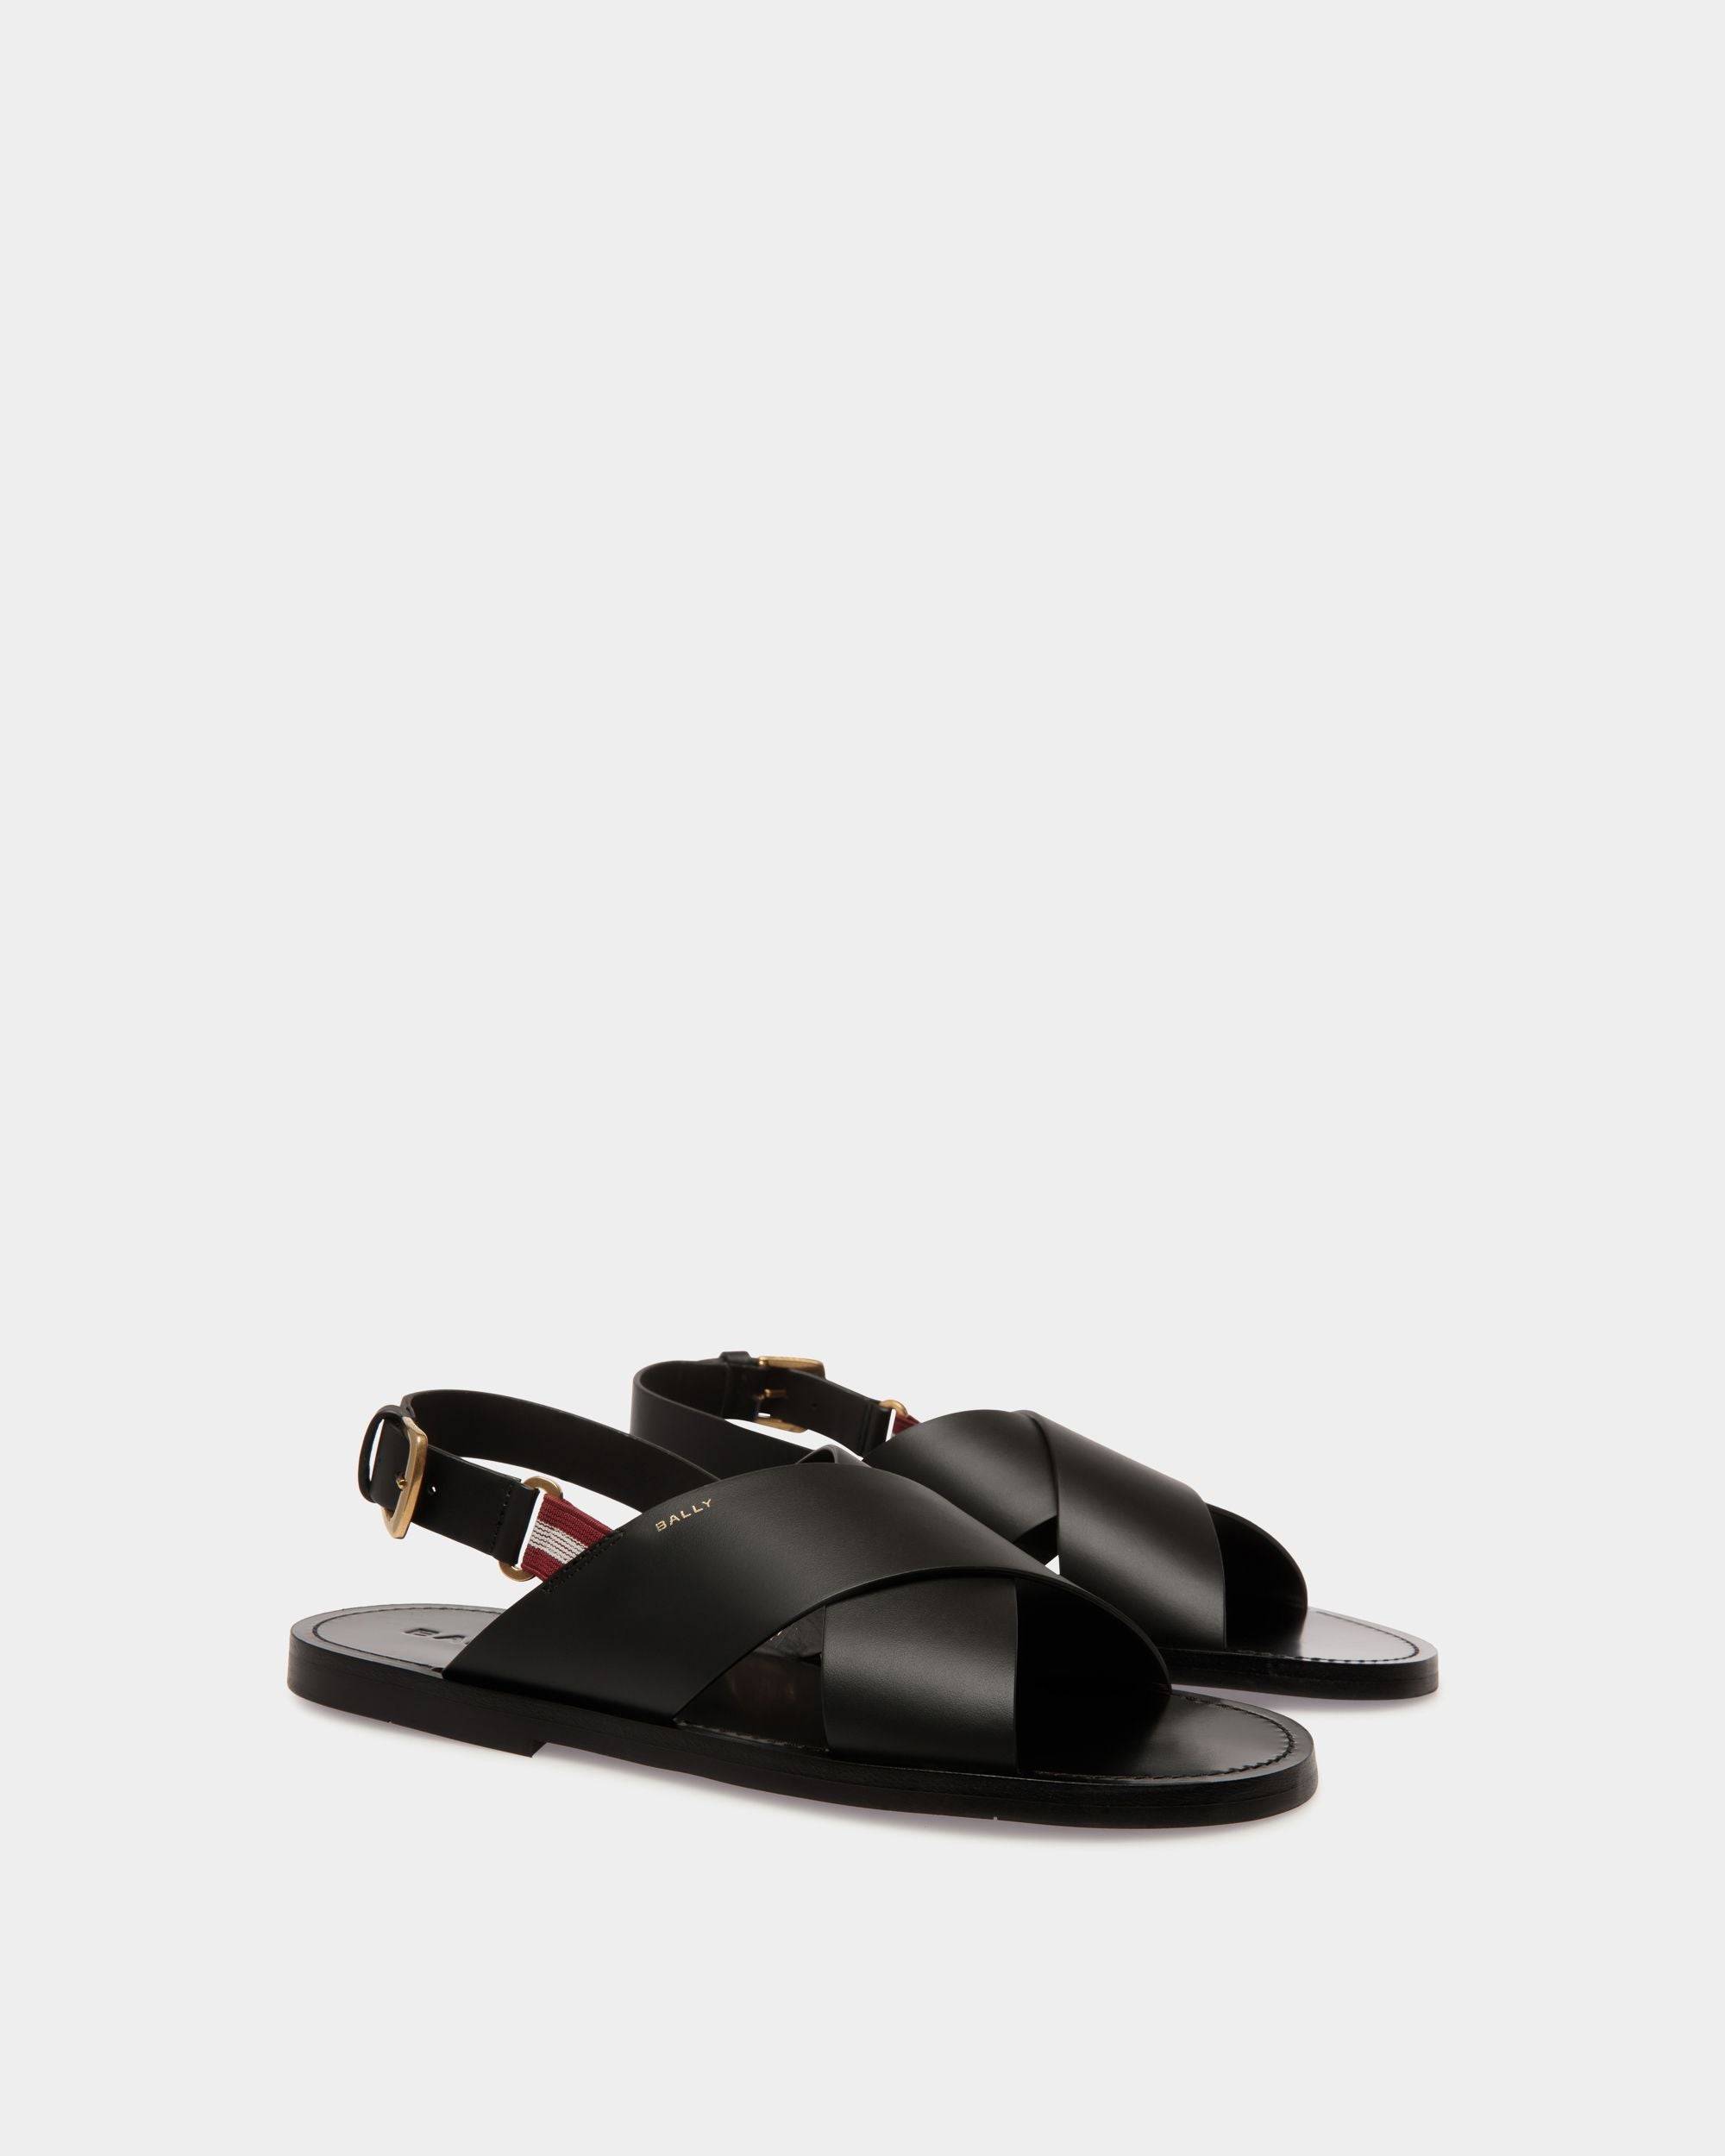 Chateau Sandal in Black Leather - Men's - Bally - 03